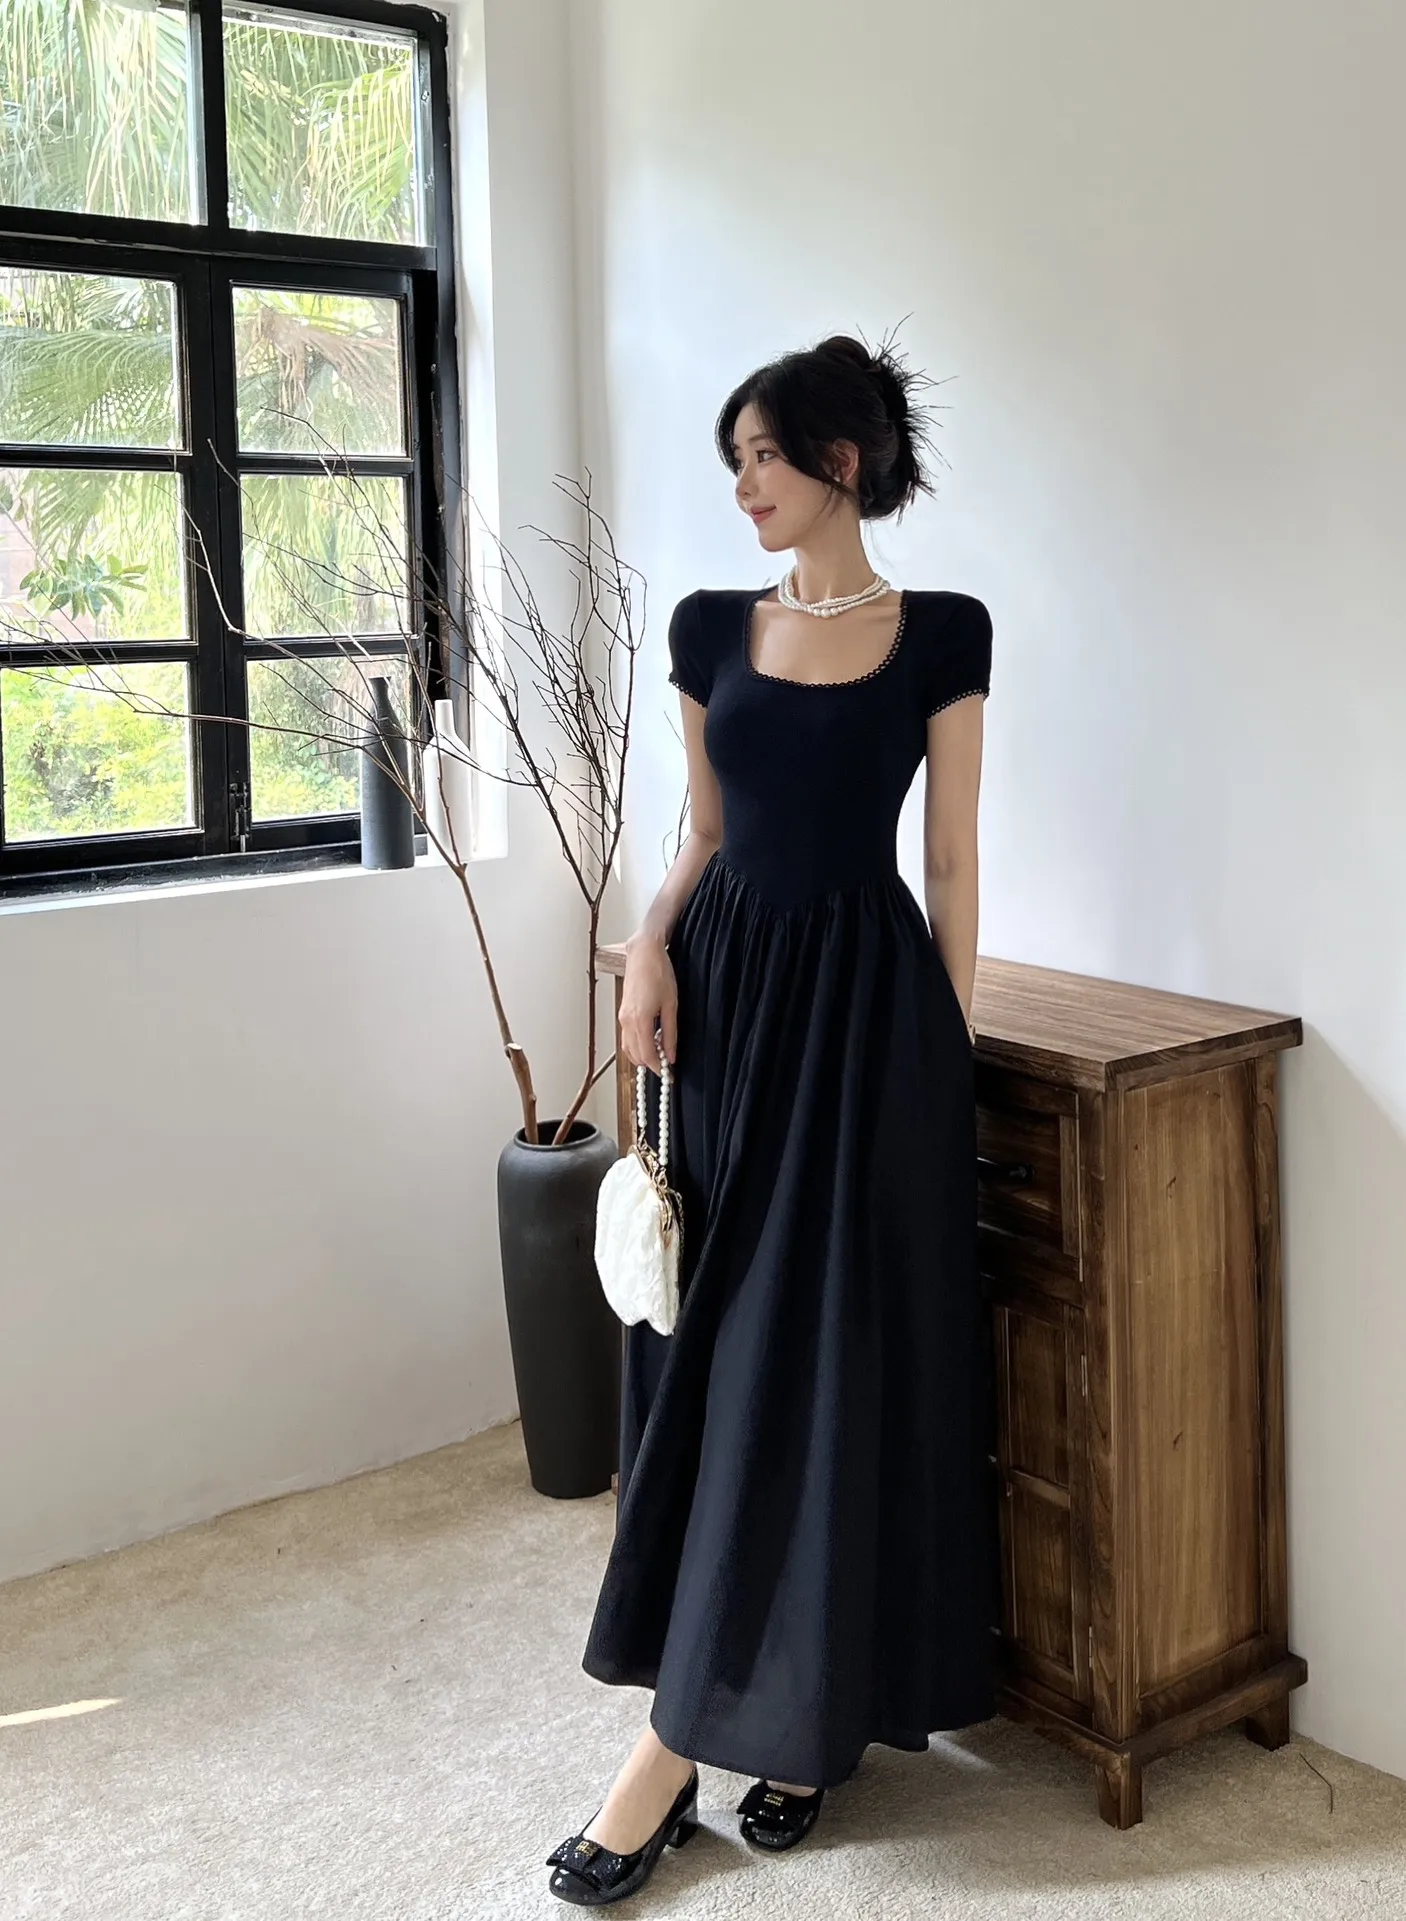 2023 spring and summer women's clothing fashion new Square Collar Hook Lace Sleeve Dress Long Skirt 0526